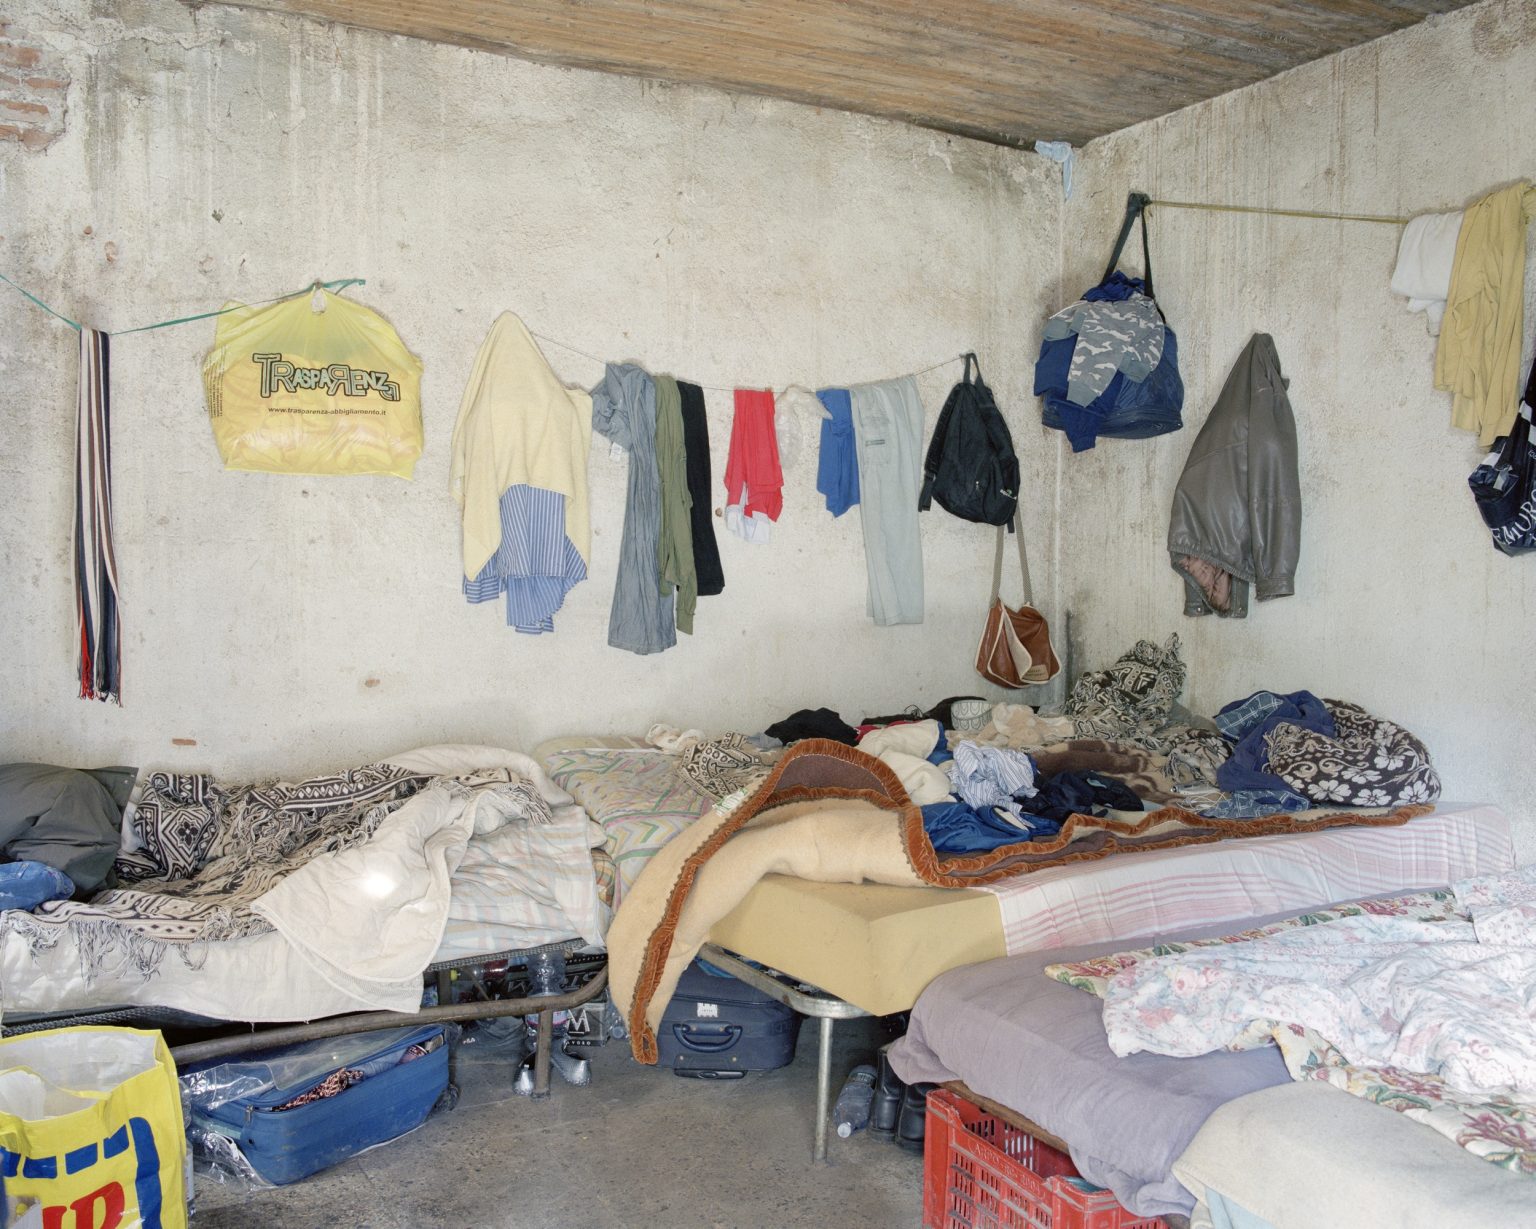 Drosi (Gioia Tauro), 2016. Occupied house by seasonal workers in Piana di Gioia Tauro. Migrant daily laborers are subject to exploitation and forced to live in unsanitary settlements. it is estimated that the wage of an agricultural worker with an irregular contract and subjected to a caporale, is 25-30 euro per day (40% in less than an Italian worker) for an average of 10-12 hours per day.><

Drosi (Gioia Tauro), 2016. Casolare occupato da lavoratori stagionali nella Piana di Gioia Tauro. I lavoratori stagionali stranieri sono soggetti a sfruttamento lavorativo e costretti a vivere in insediamenti in pessime condizioni sanitarie. Si stima che il salario di un lavoratore agricolo con un contratto irregolare e soggetto ad un "caporale" sia di 25-30 euro al giorno (40% in meno di un lavoratore italiano) per una media di 10-12 ore al giorno.